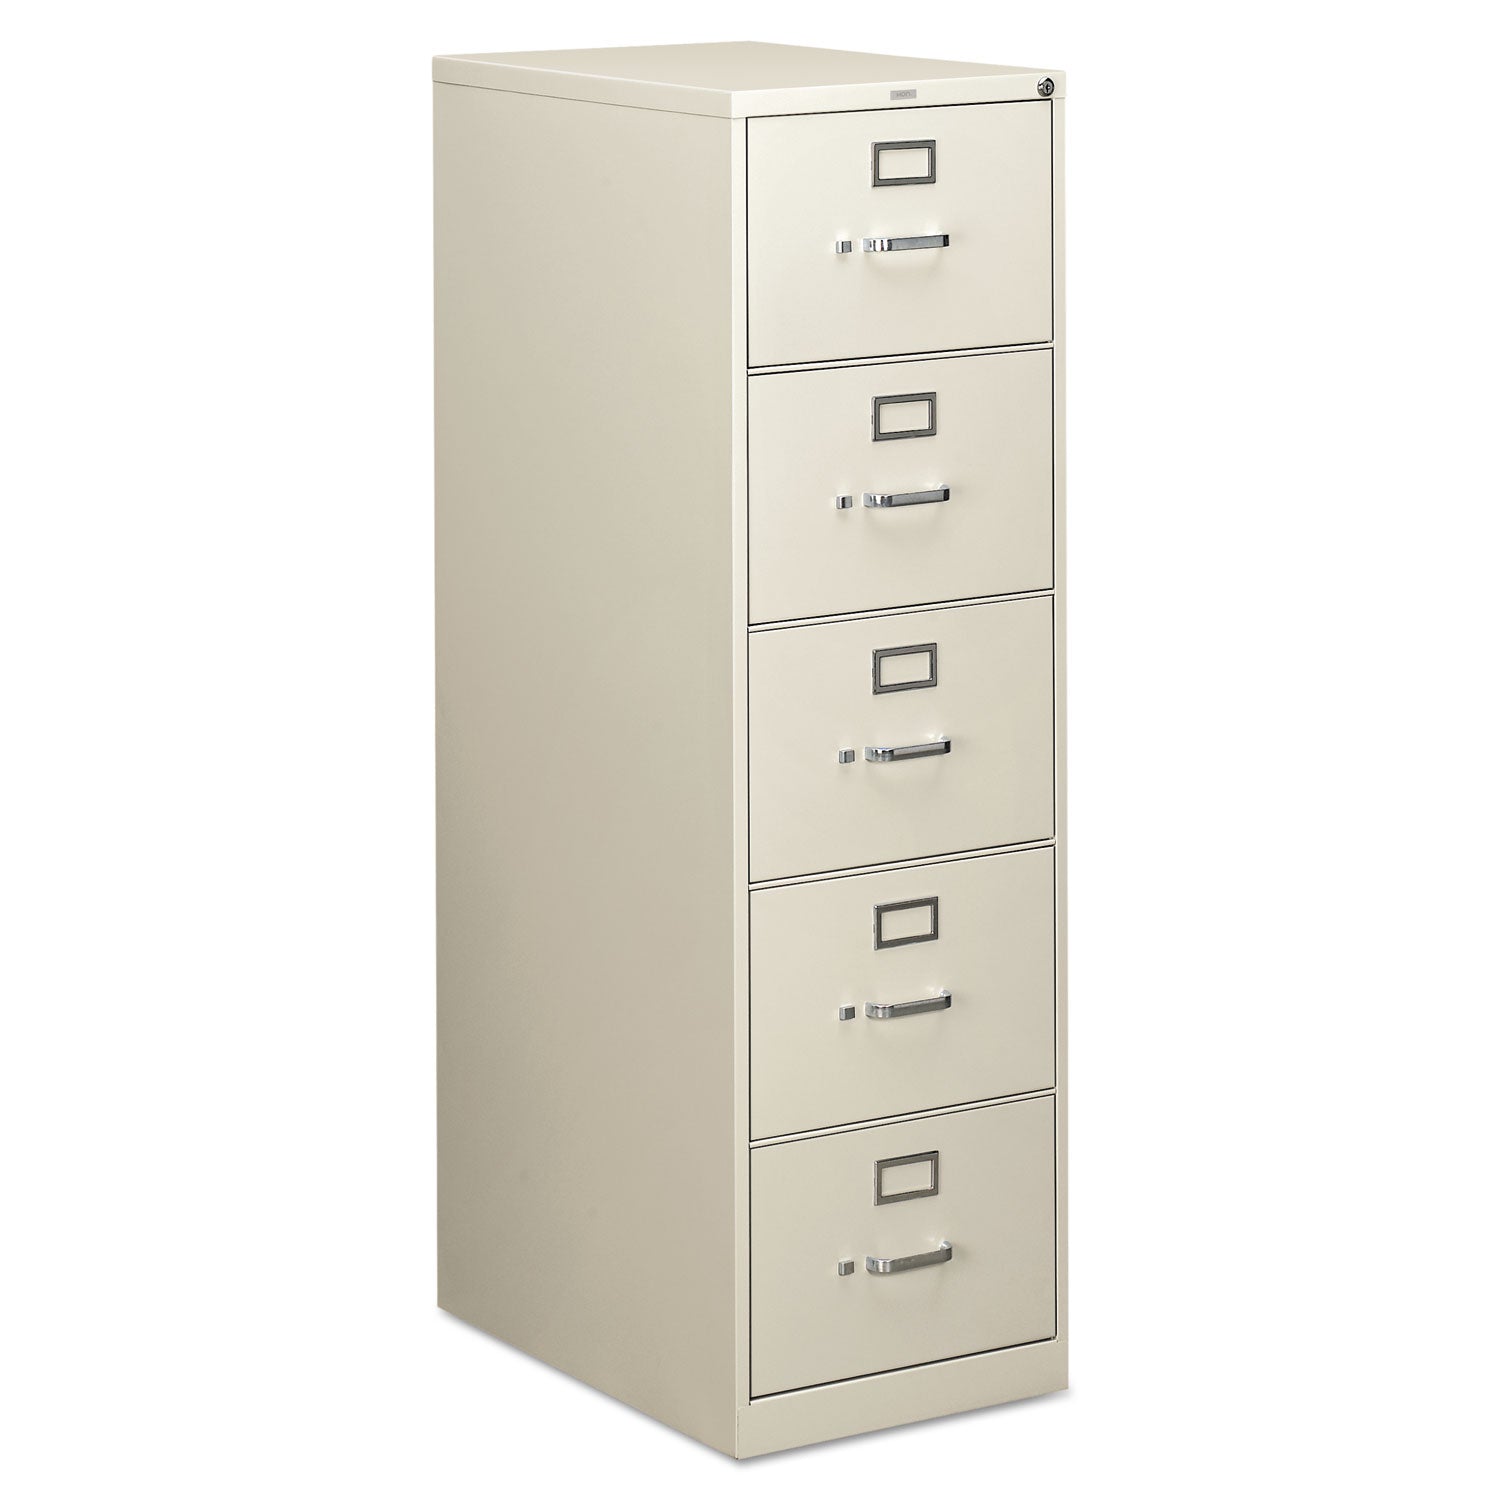 310 Series Vertical File, 5 Legal-Size File Drawers, Light Gray, 18.25" x 26.5" x 60 - 